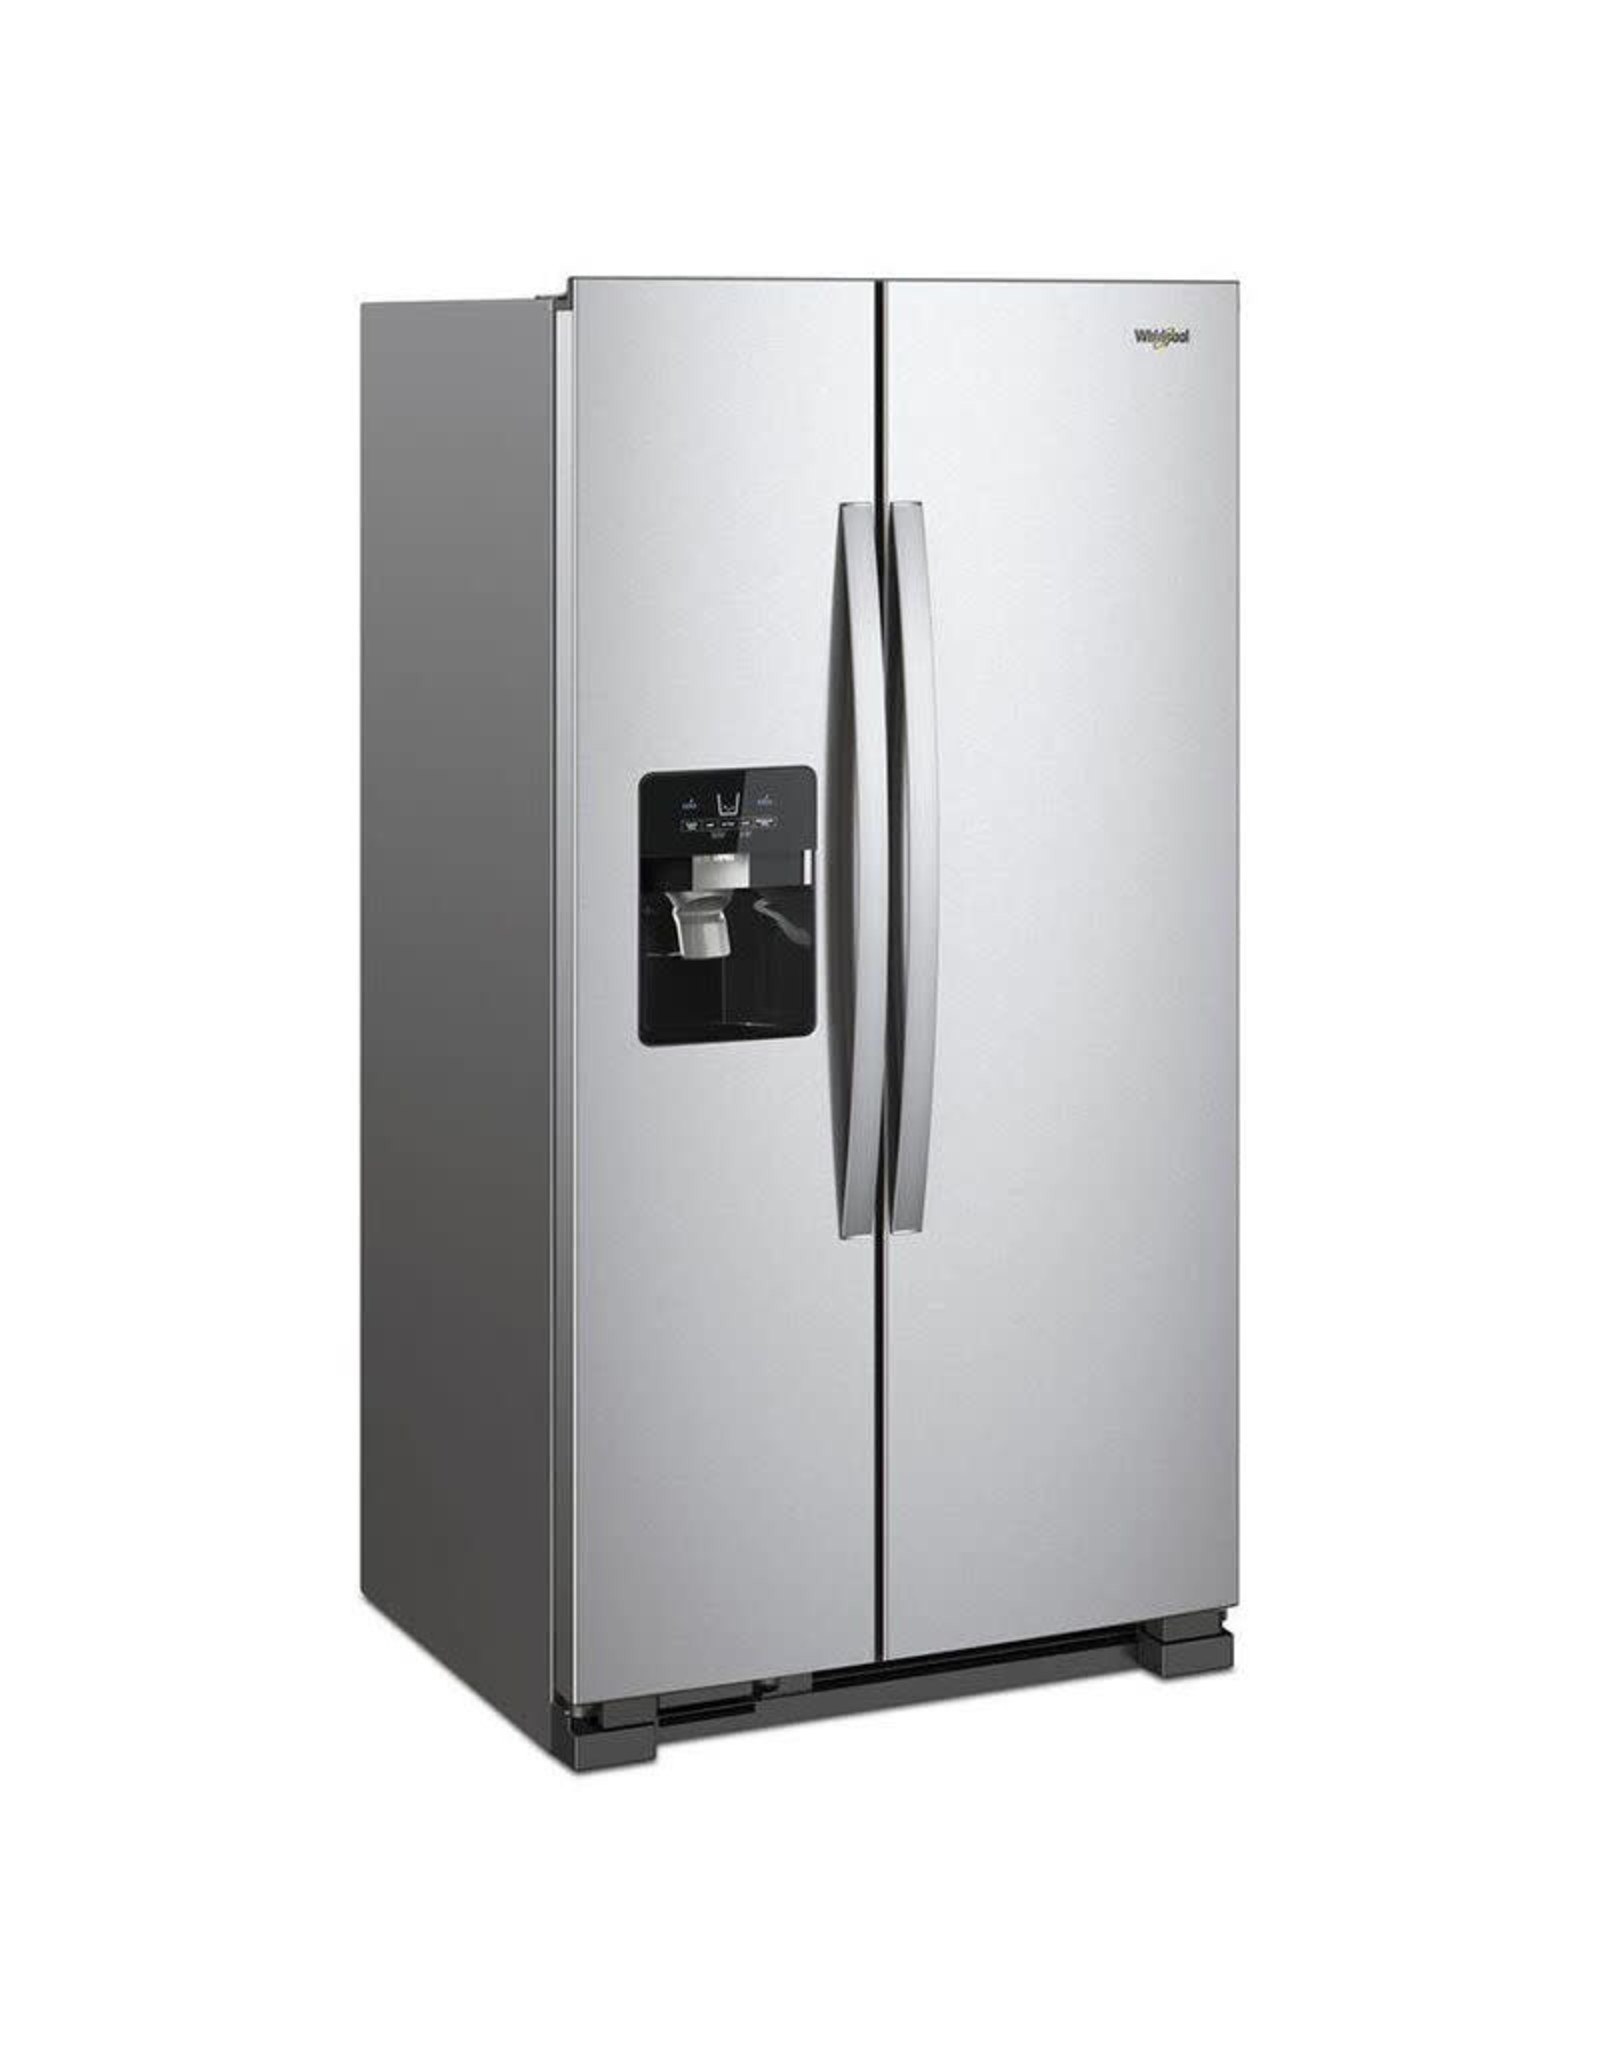 WRS555SIHZ  WHR No Frost Side - Free Standing Refr Frez - 25 CU FT, 36 INCH WIDTH, LED LIGHTING, D